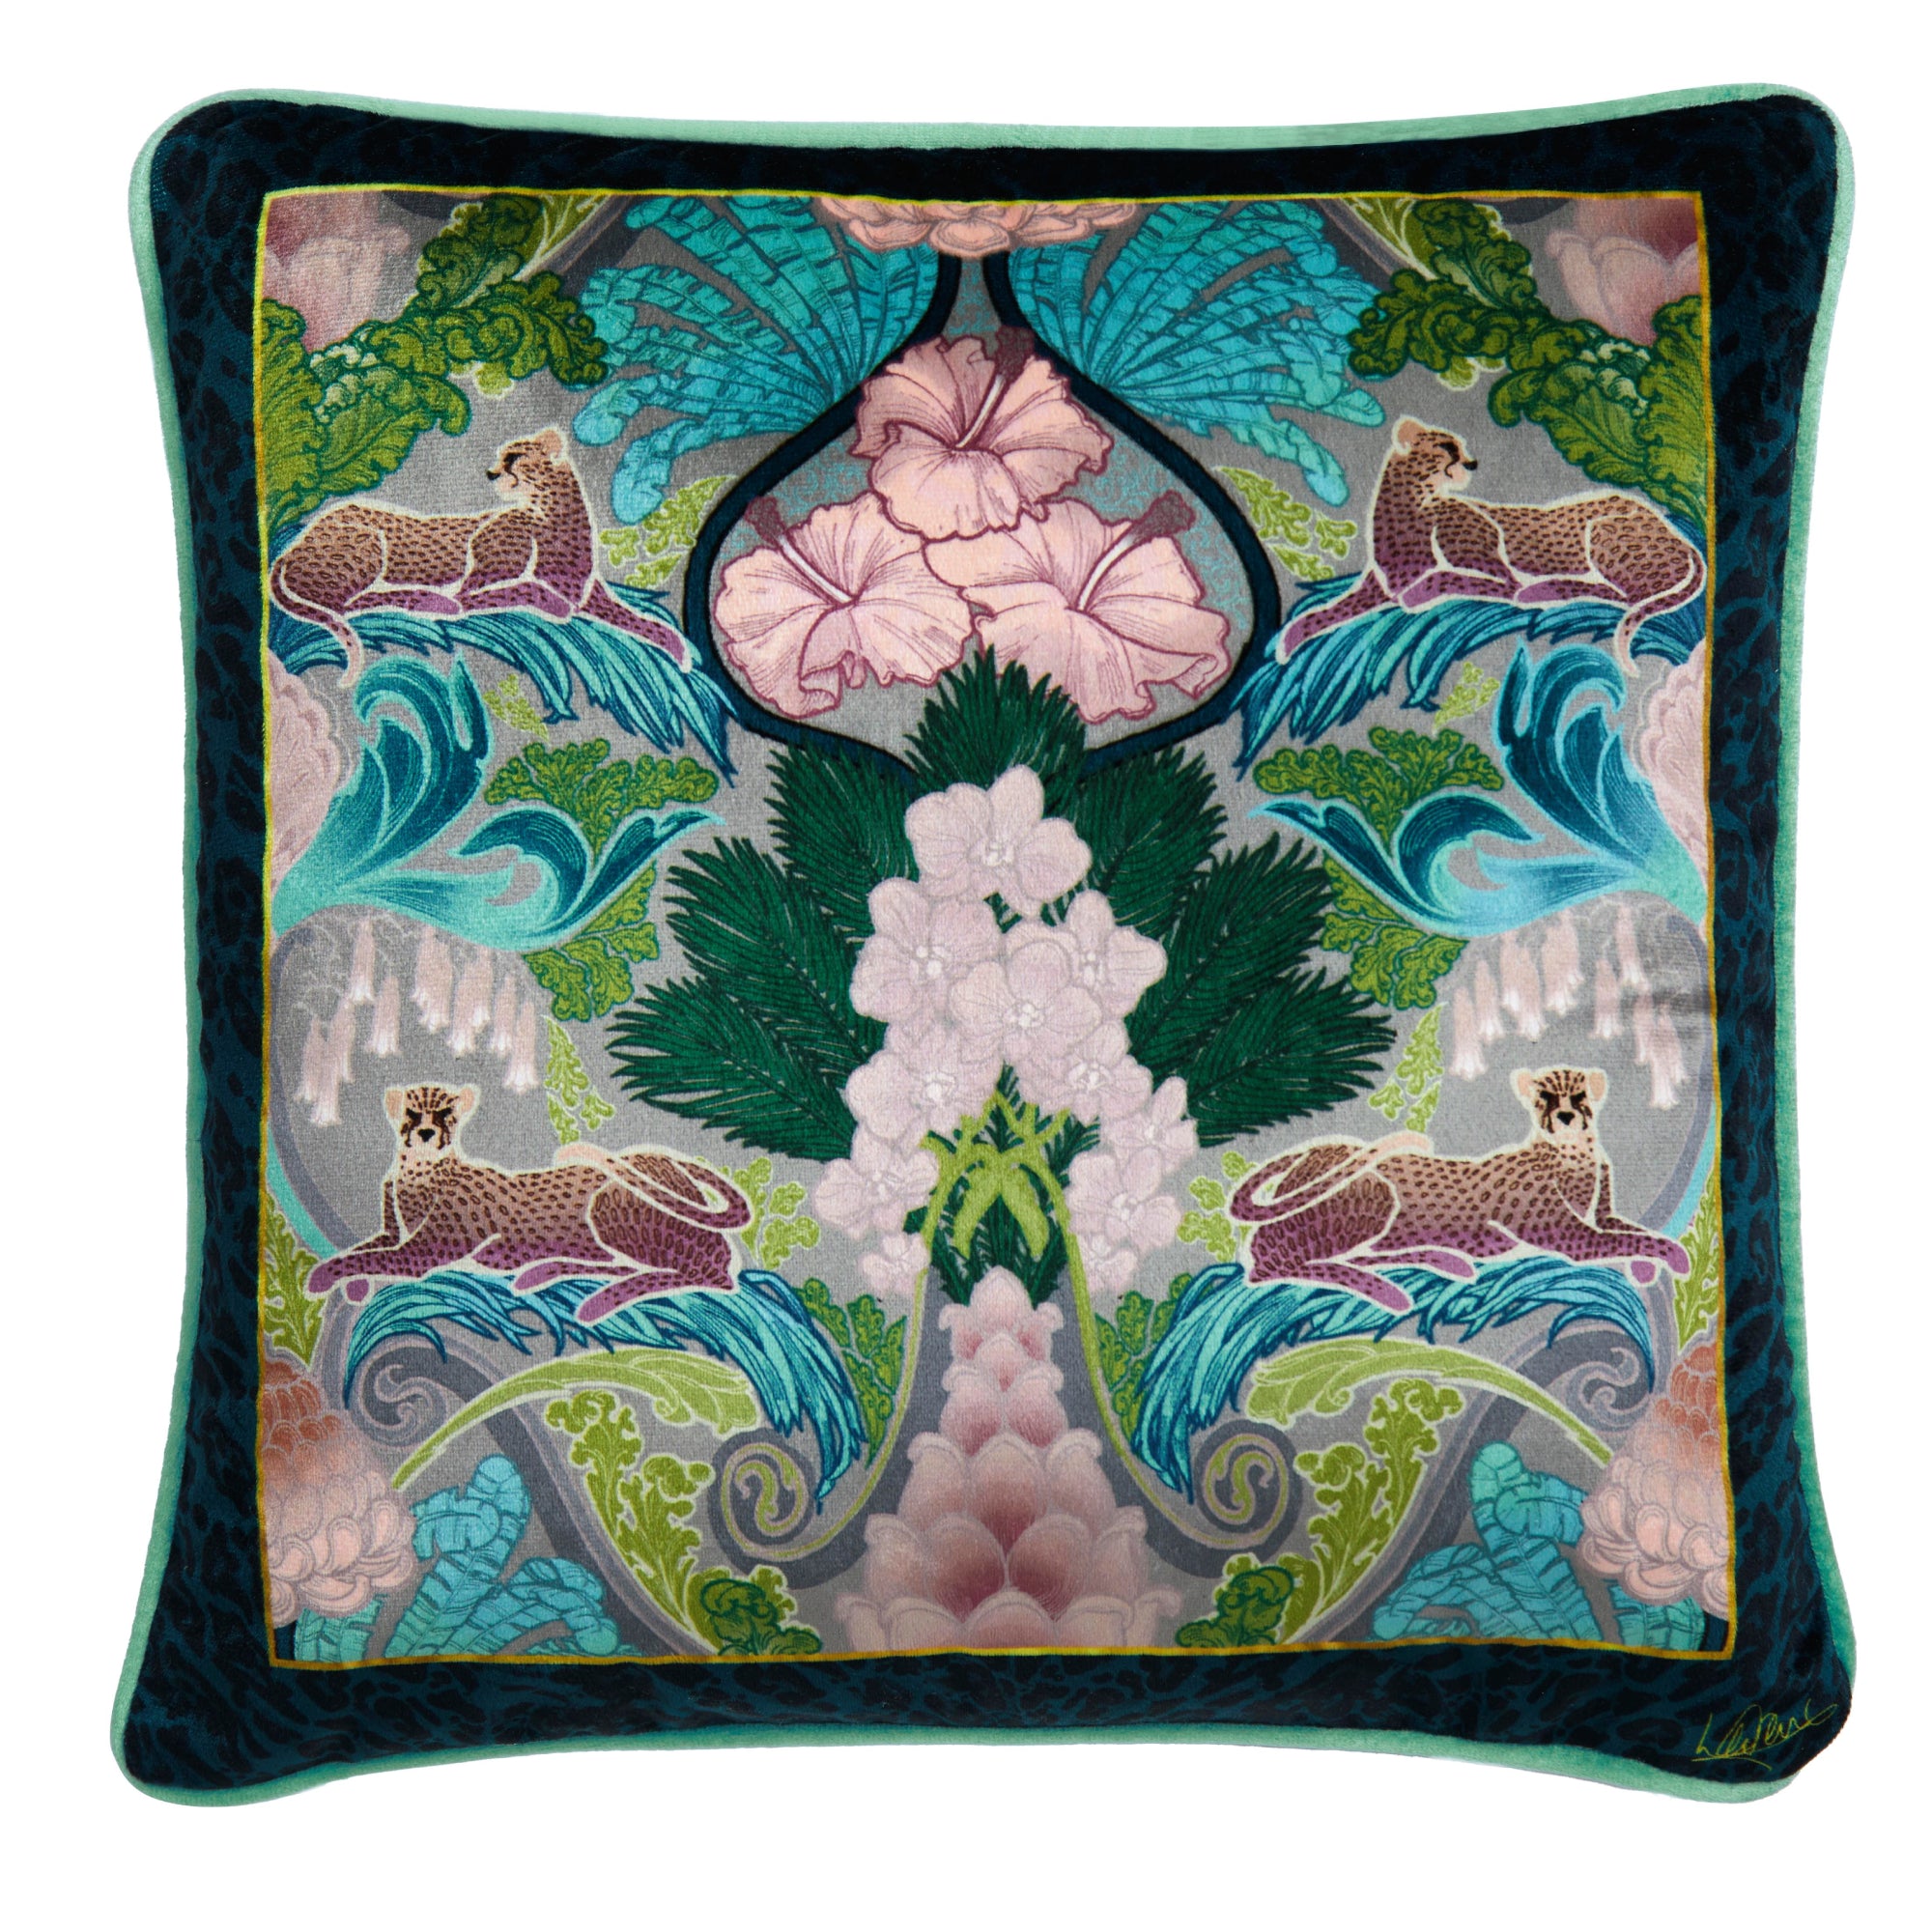 Filled Cushion Suburban Jungle by Laurence Llewelyn-Bowen in Teal